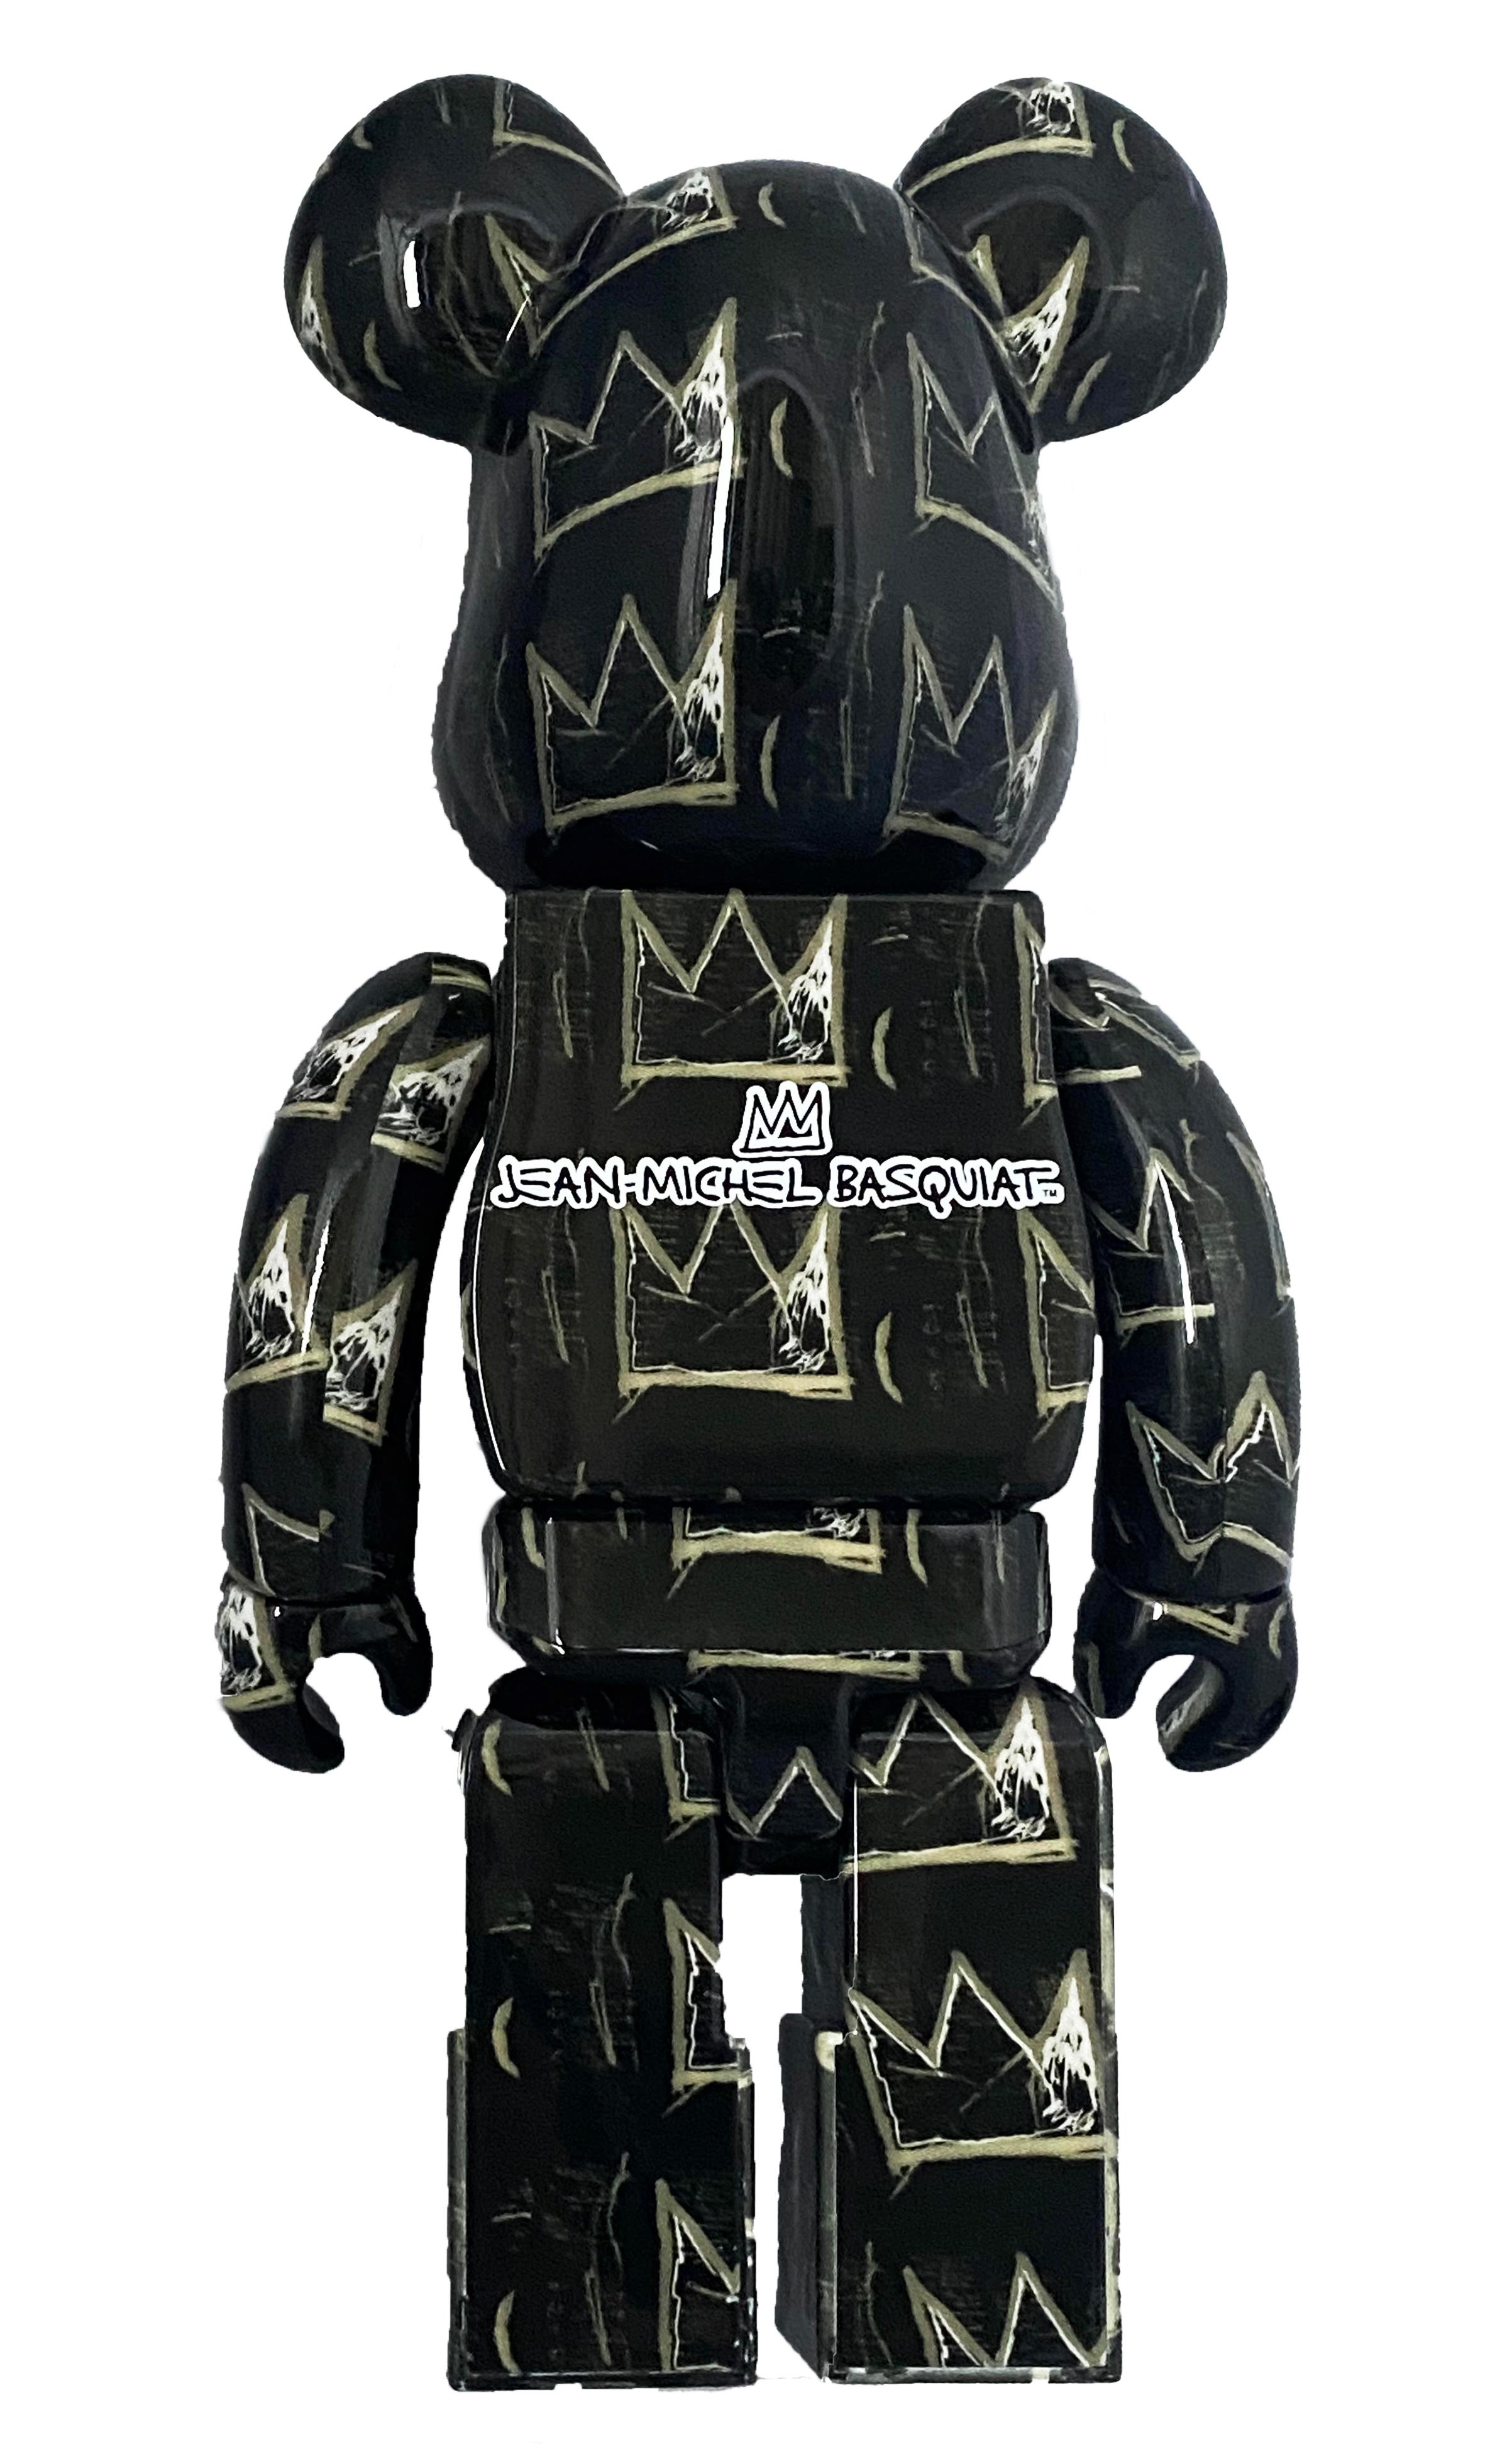 Jean-Michel Basquiat Bearbrick 400%: set of 2 works:
Unique, timeless collectibles trademarked & licensed by the Estate of Jean-Michel Basquiat (crown figure), and the estates of Basquiat & Andy Warhol (red figure). The partnered collectibles reveal